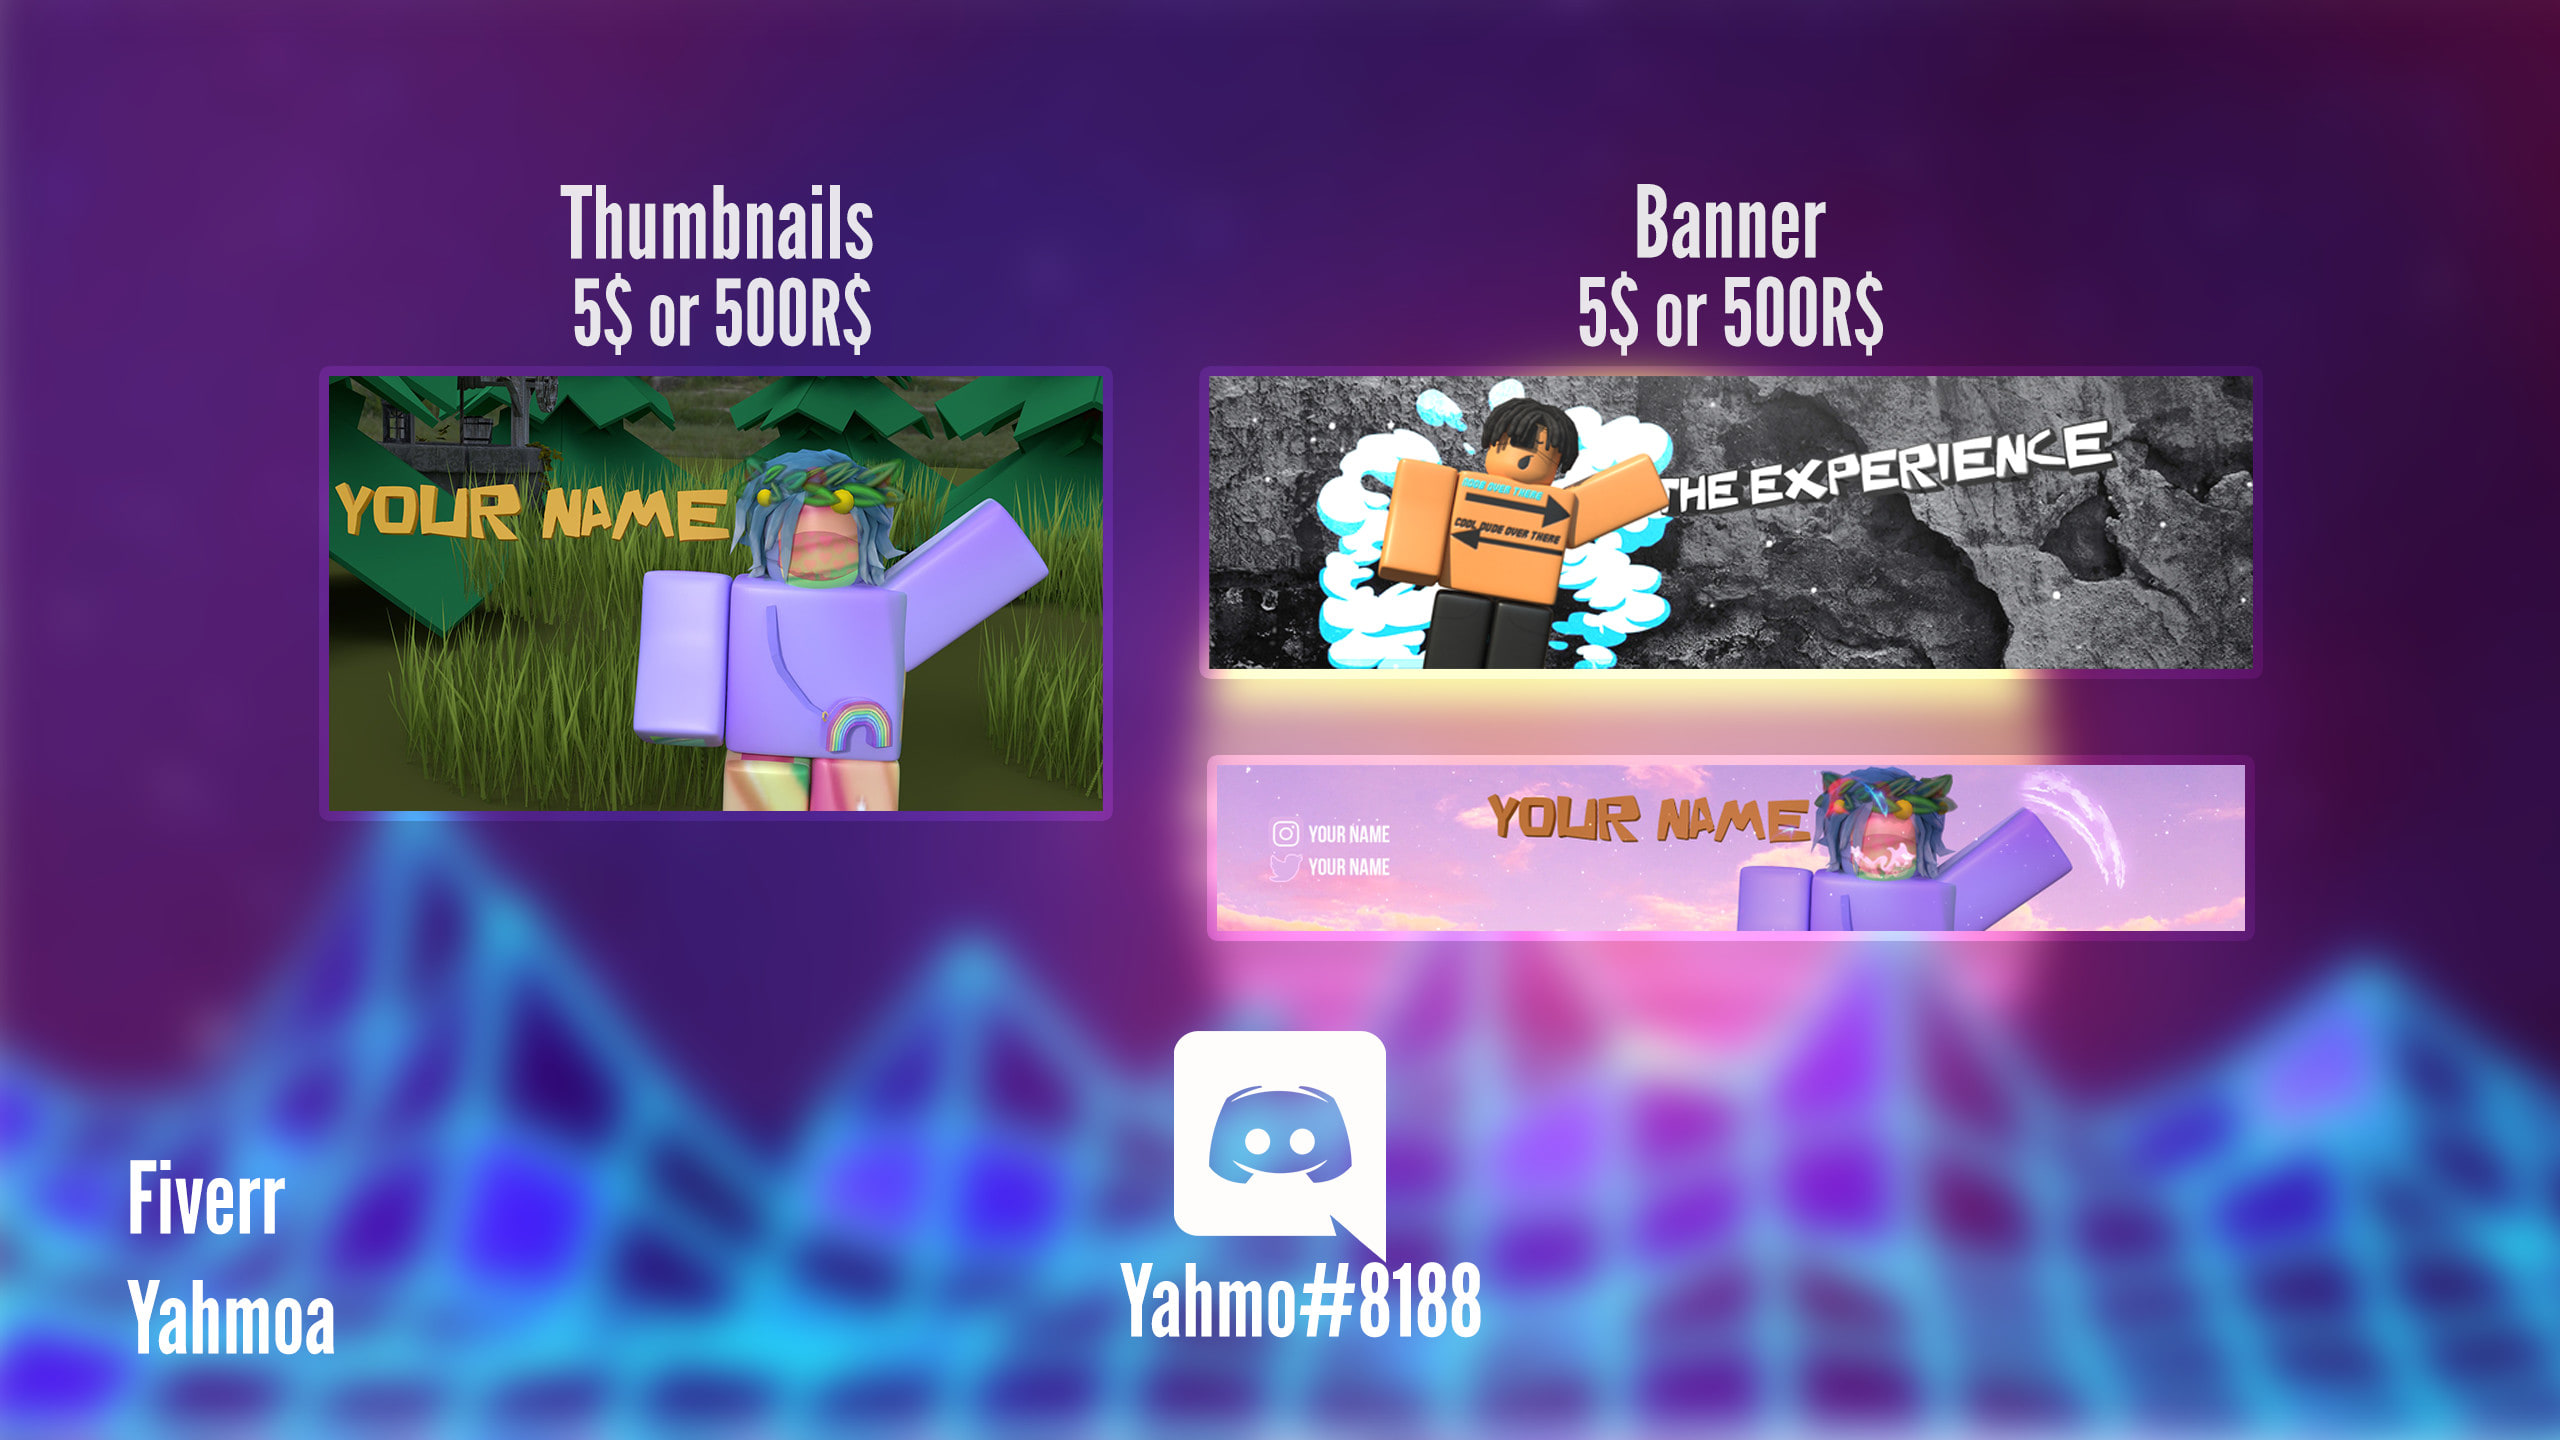 Do A Roblox Banner Or A Thumbnail For You Gfx By Yahmoa - bigger fudd10 banner roblox